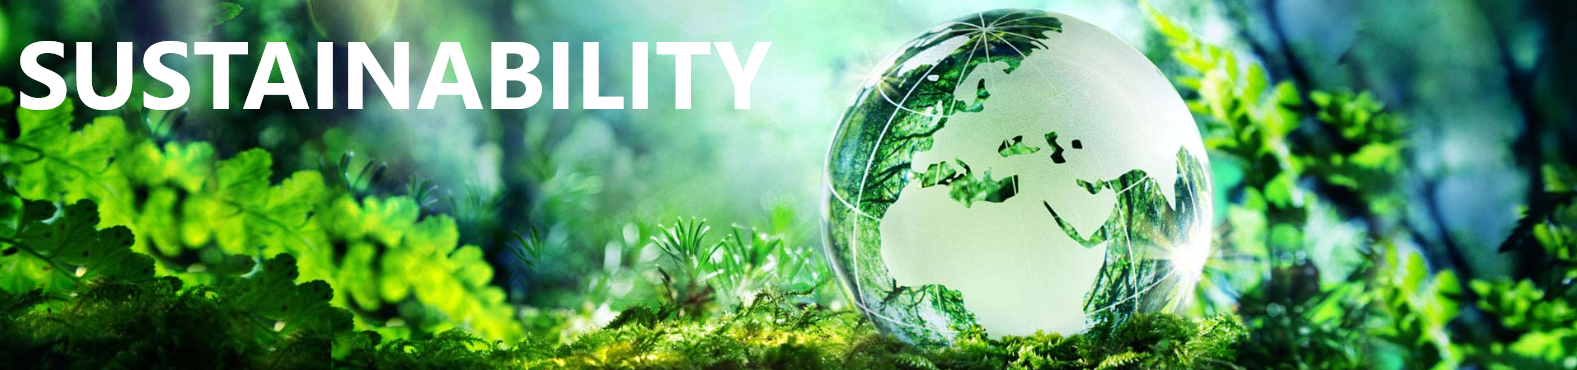 Sustainability banner 1.PNG